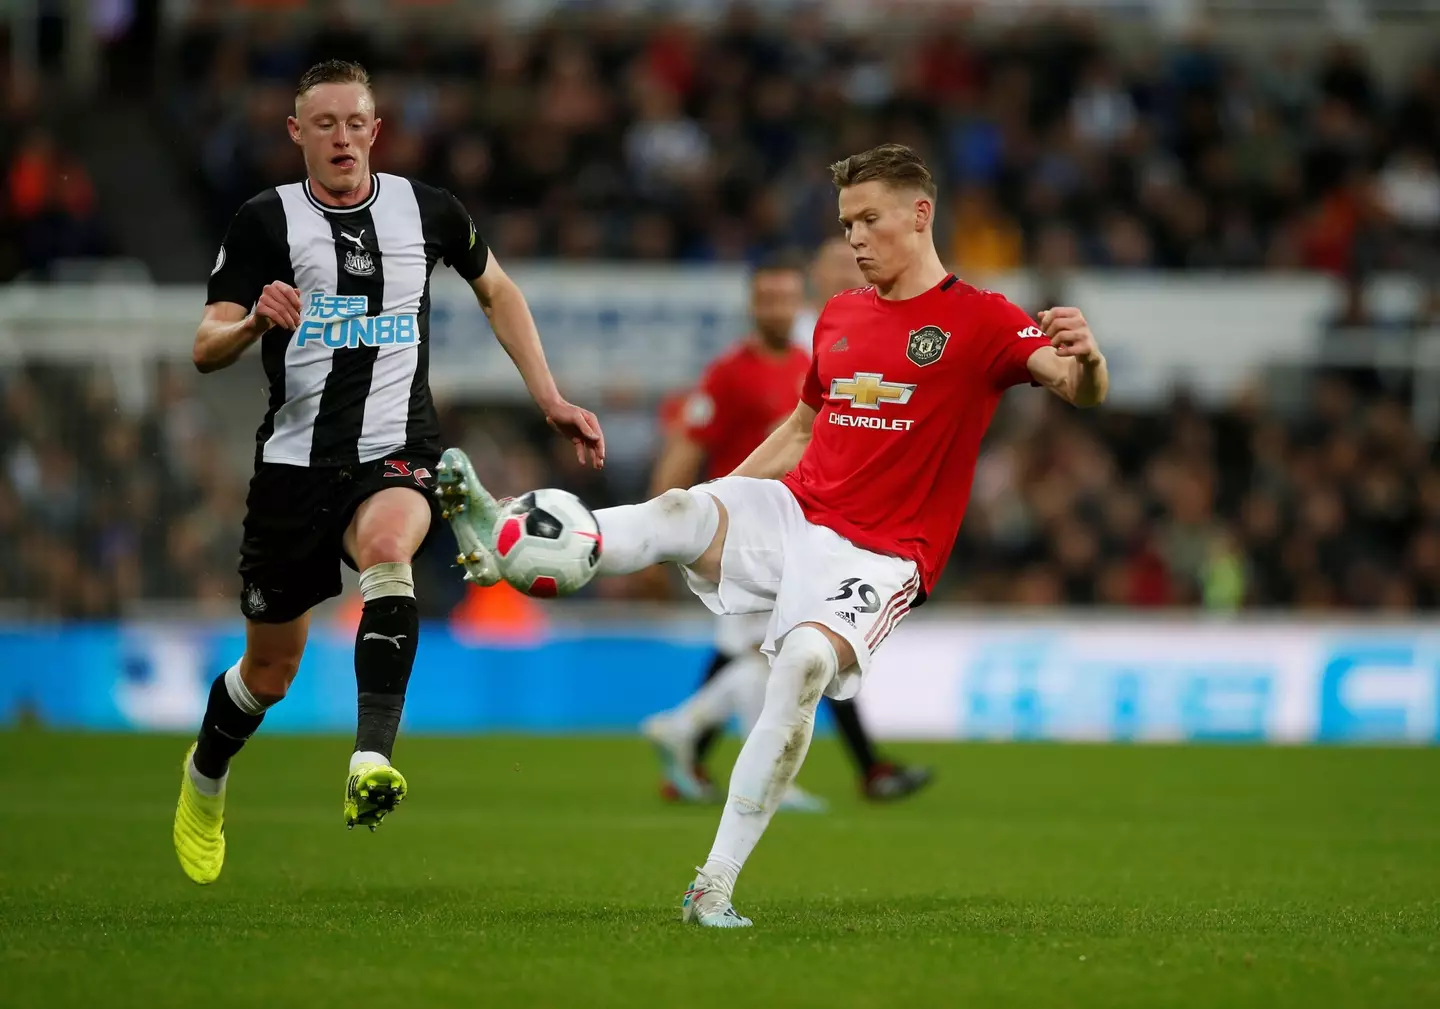 Longstaff and McTominay could soon be teammates. Image: Alamy